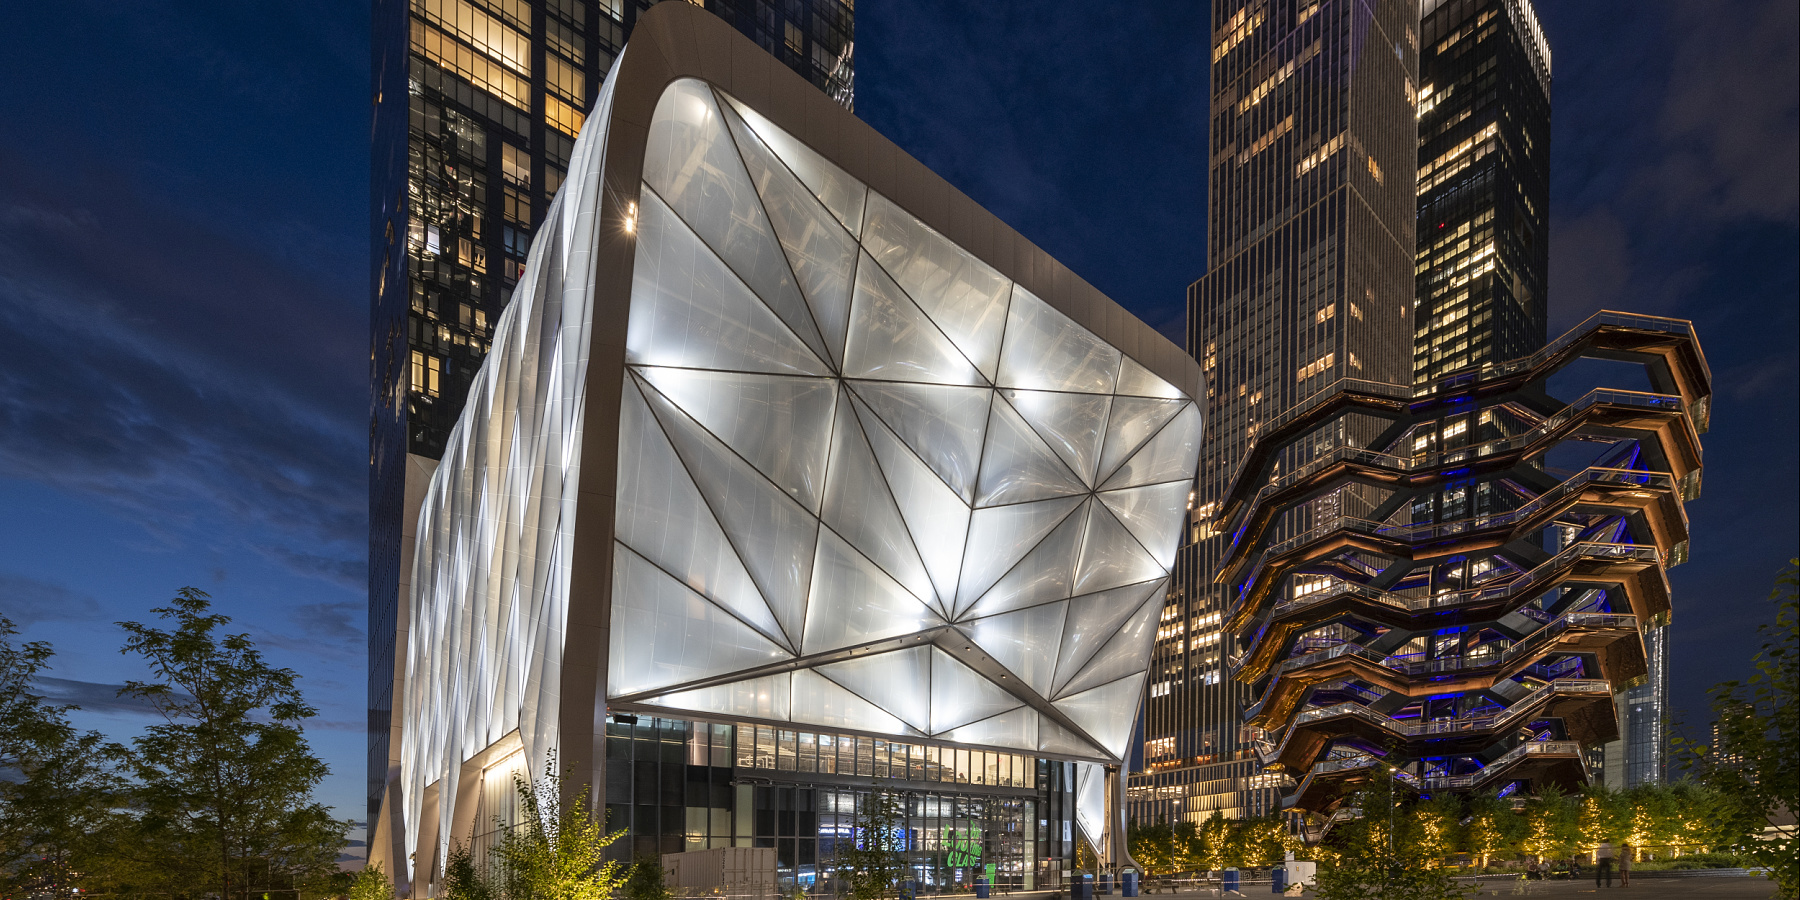 The Shed/Hudson Yards, New York City / ERCO, New York City, Hudson Yards, United States